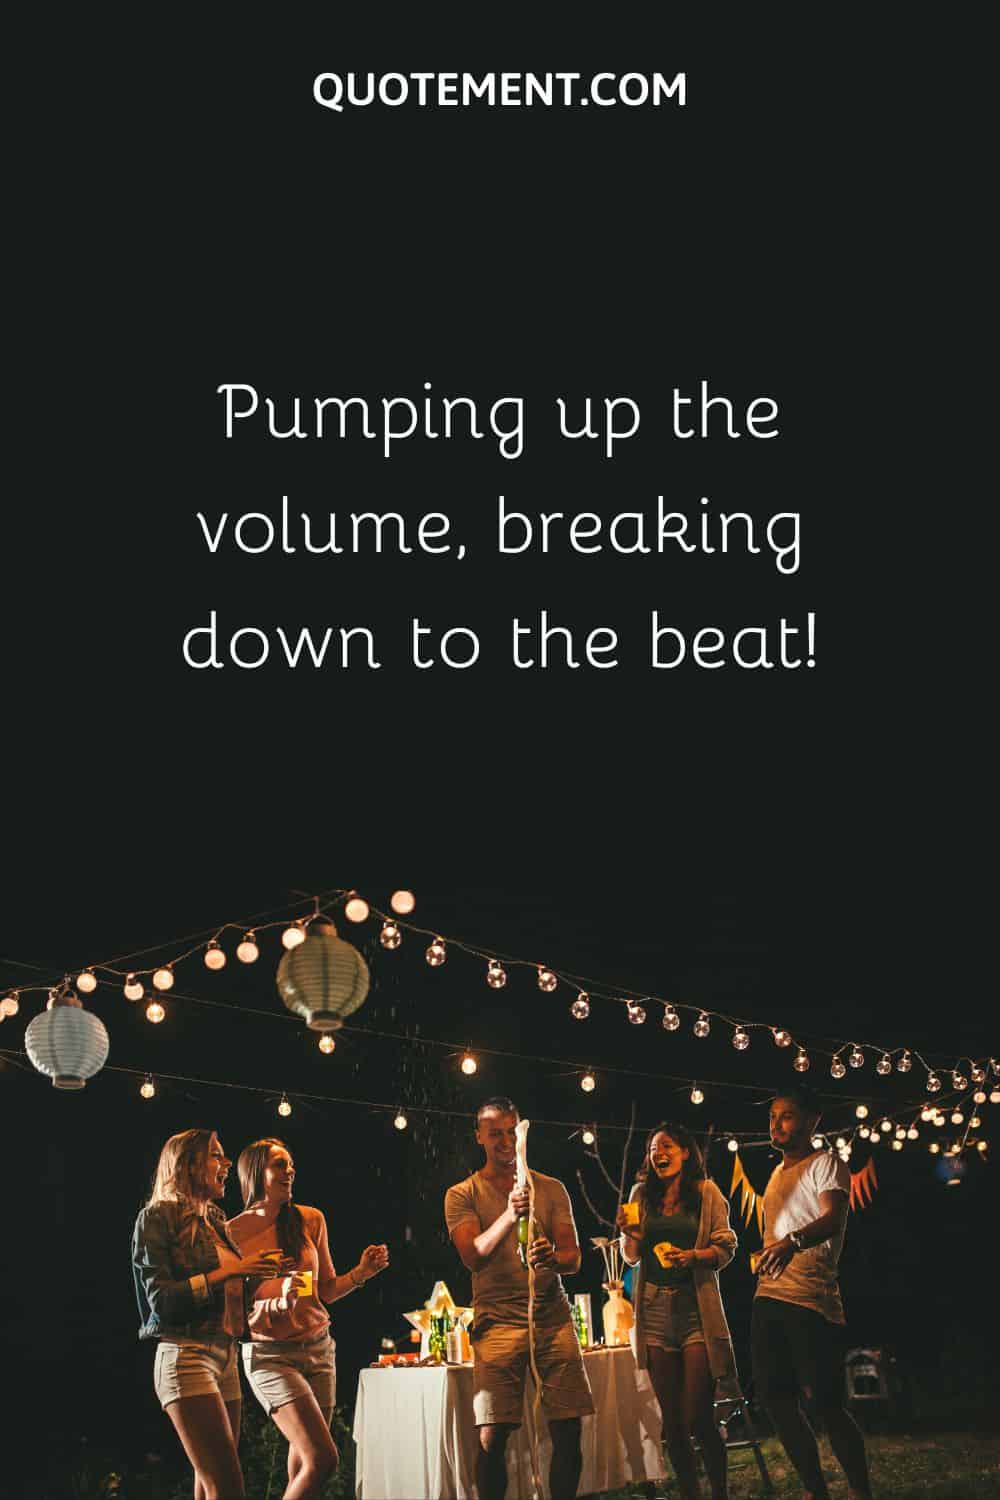 Pumping up the volume, breaking down to the beat